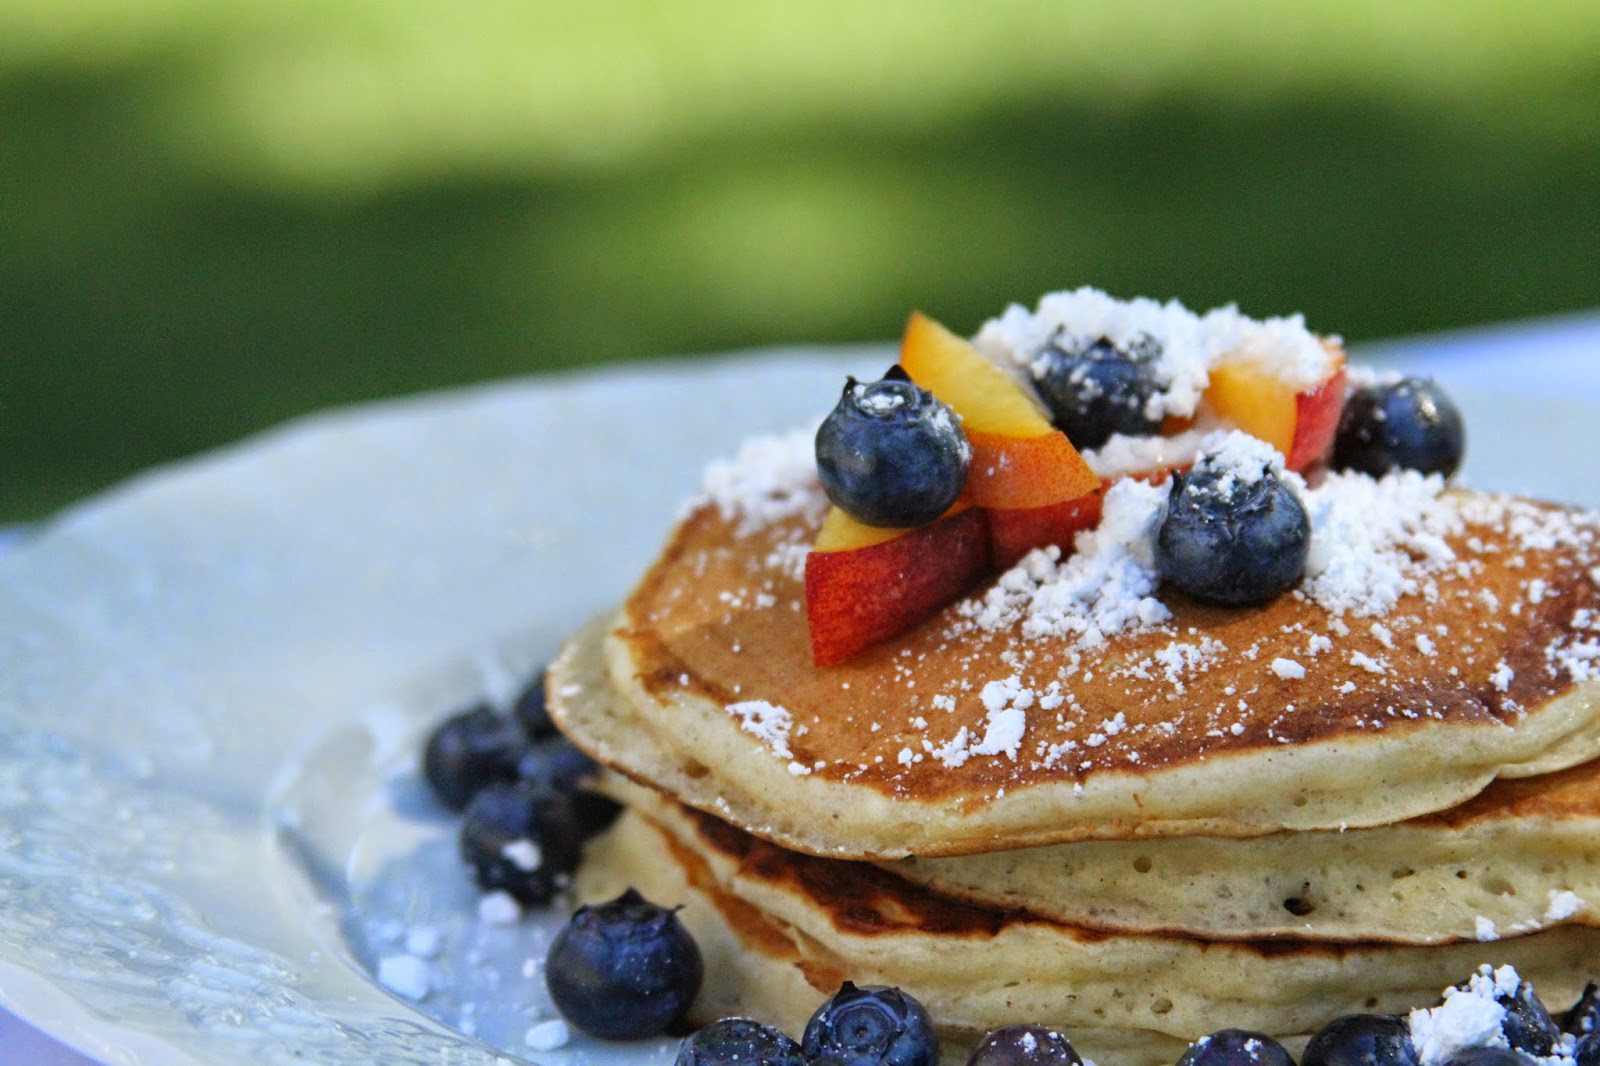 Buttermilk pancakes are a hit, with or without lemon zest